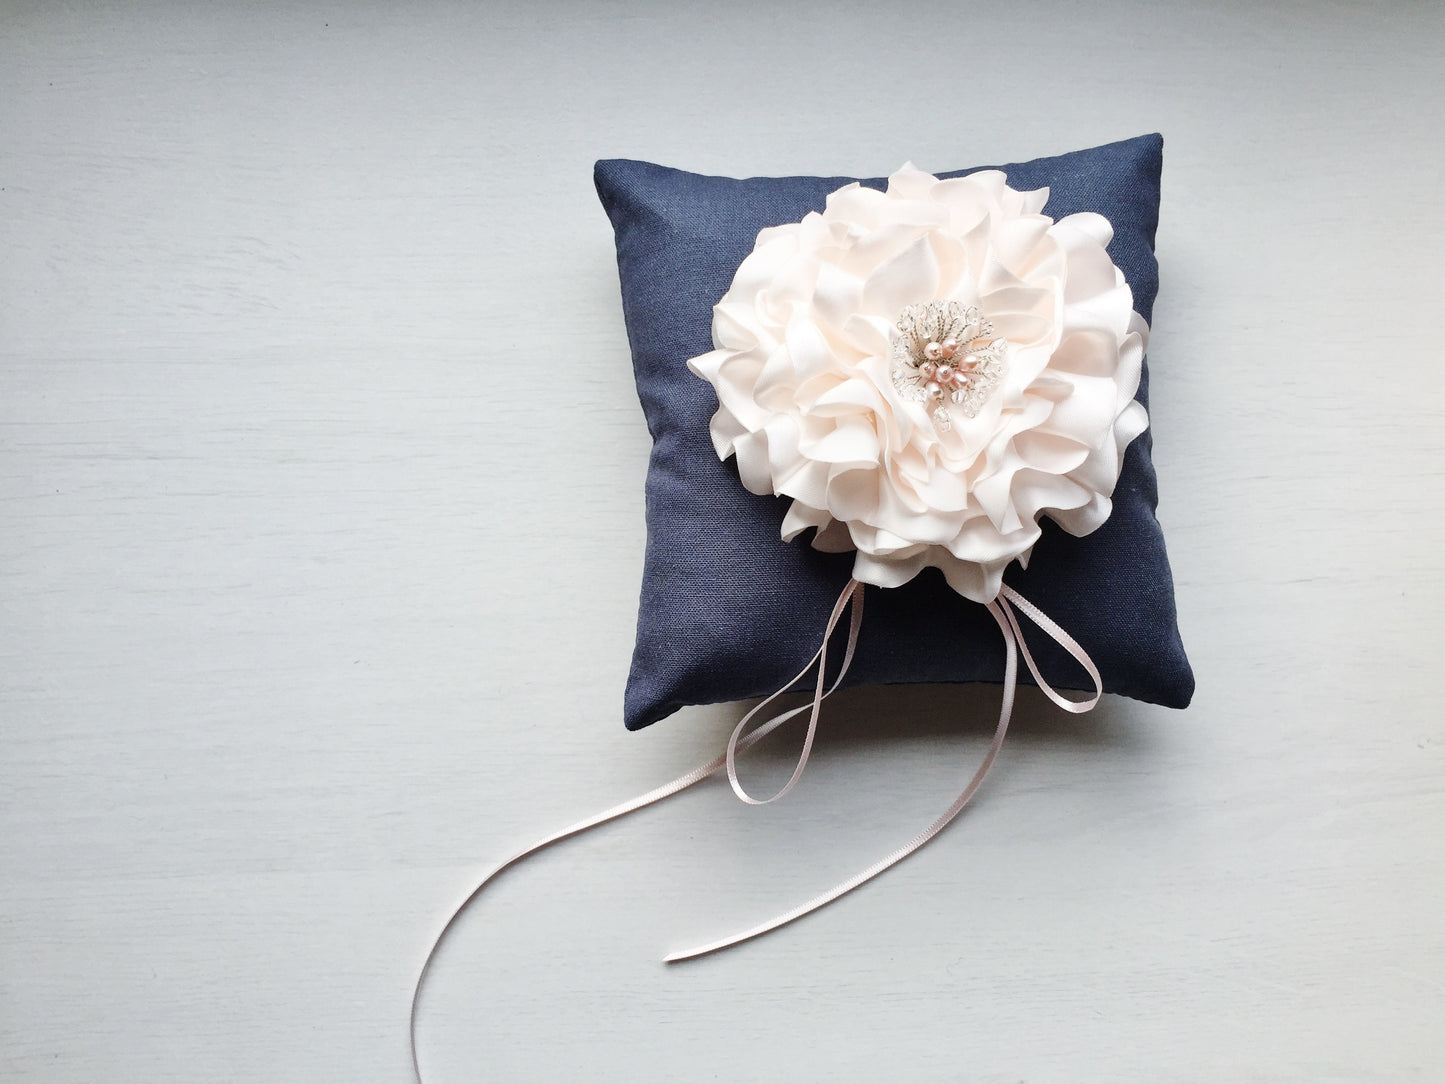 Signature Peony Ring Pillow in Antique Blue and Powder Pink Peony